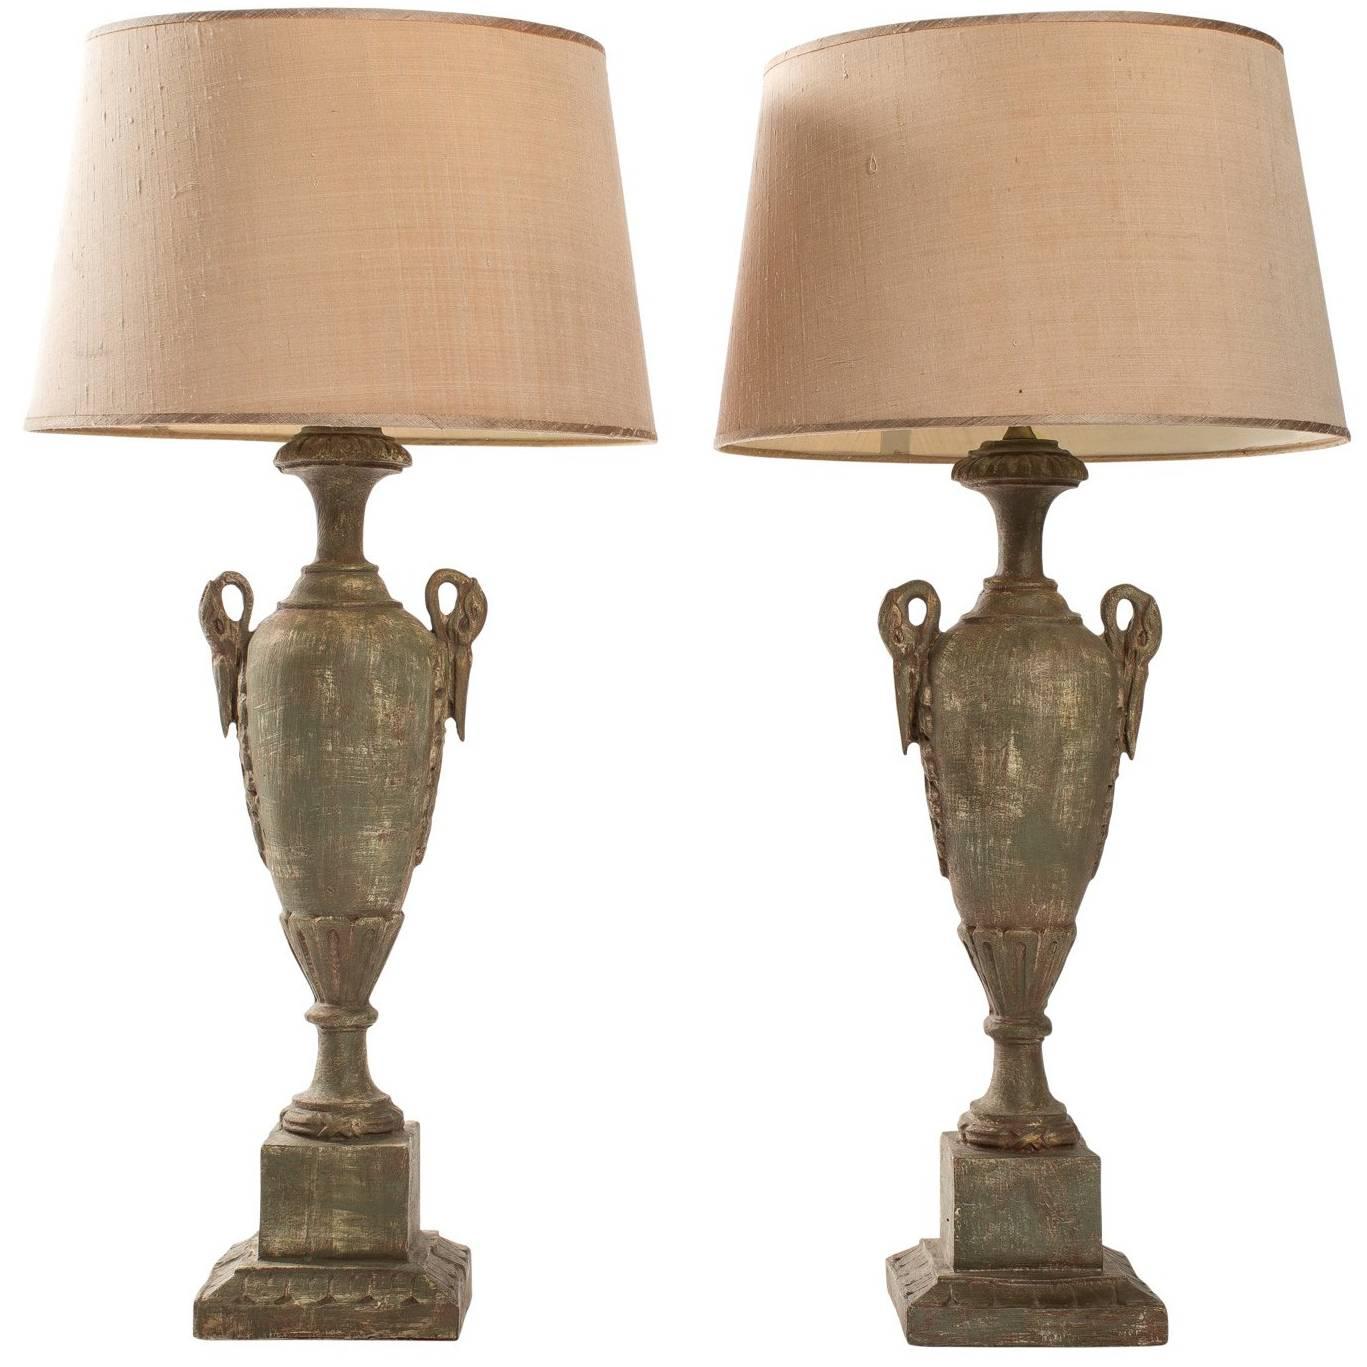 Pair of Urn Form Table Lamps